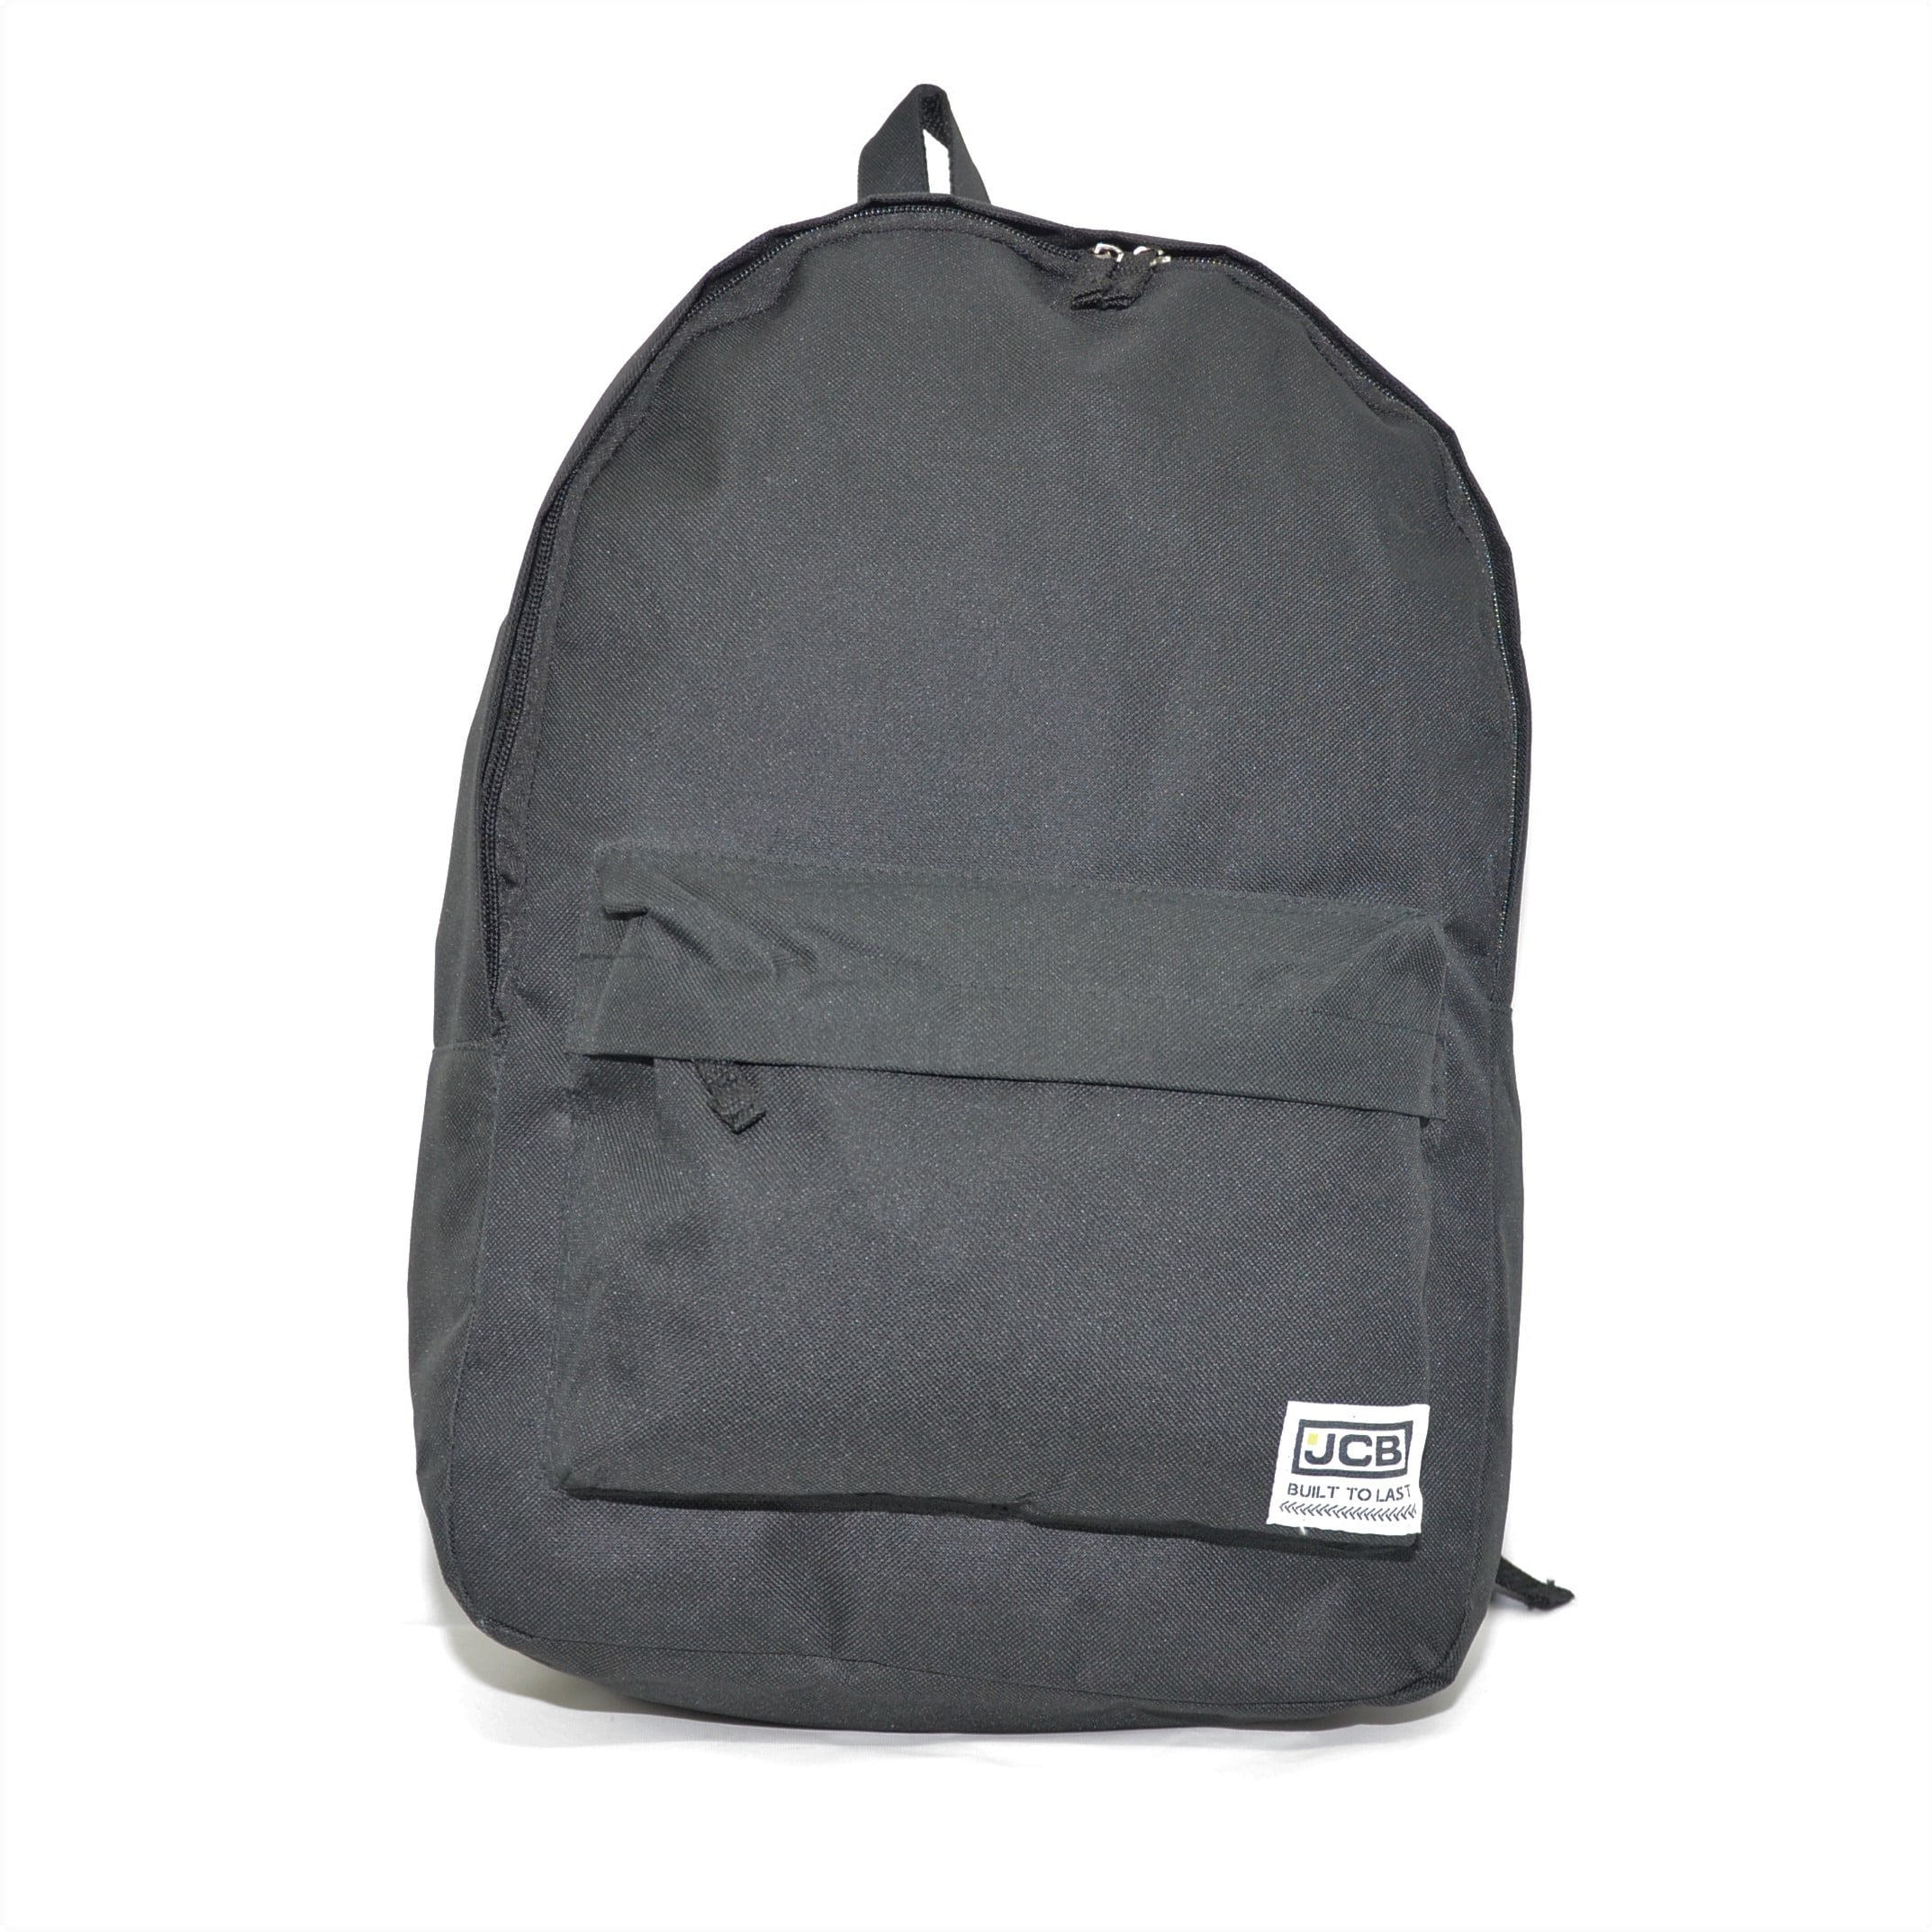 JCB Backpack – Style No. 9023 – OJP Products